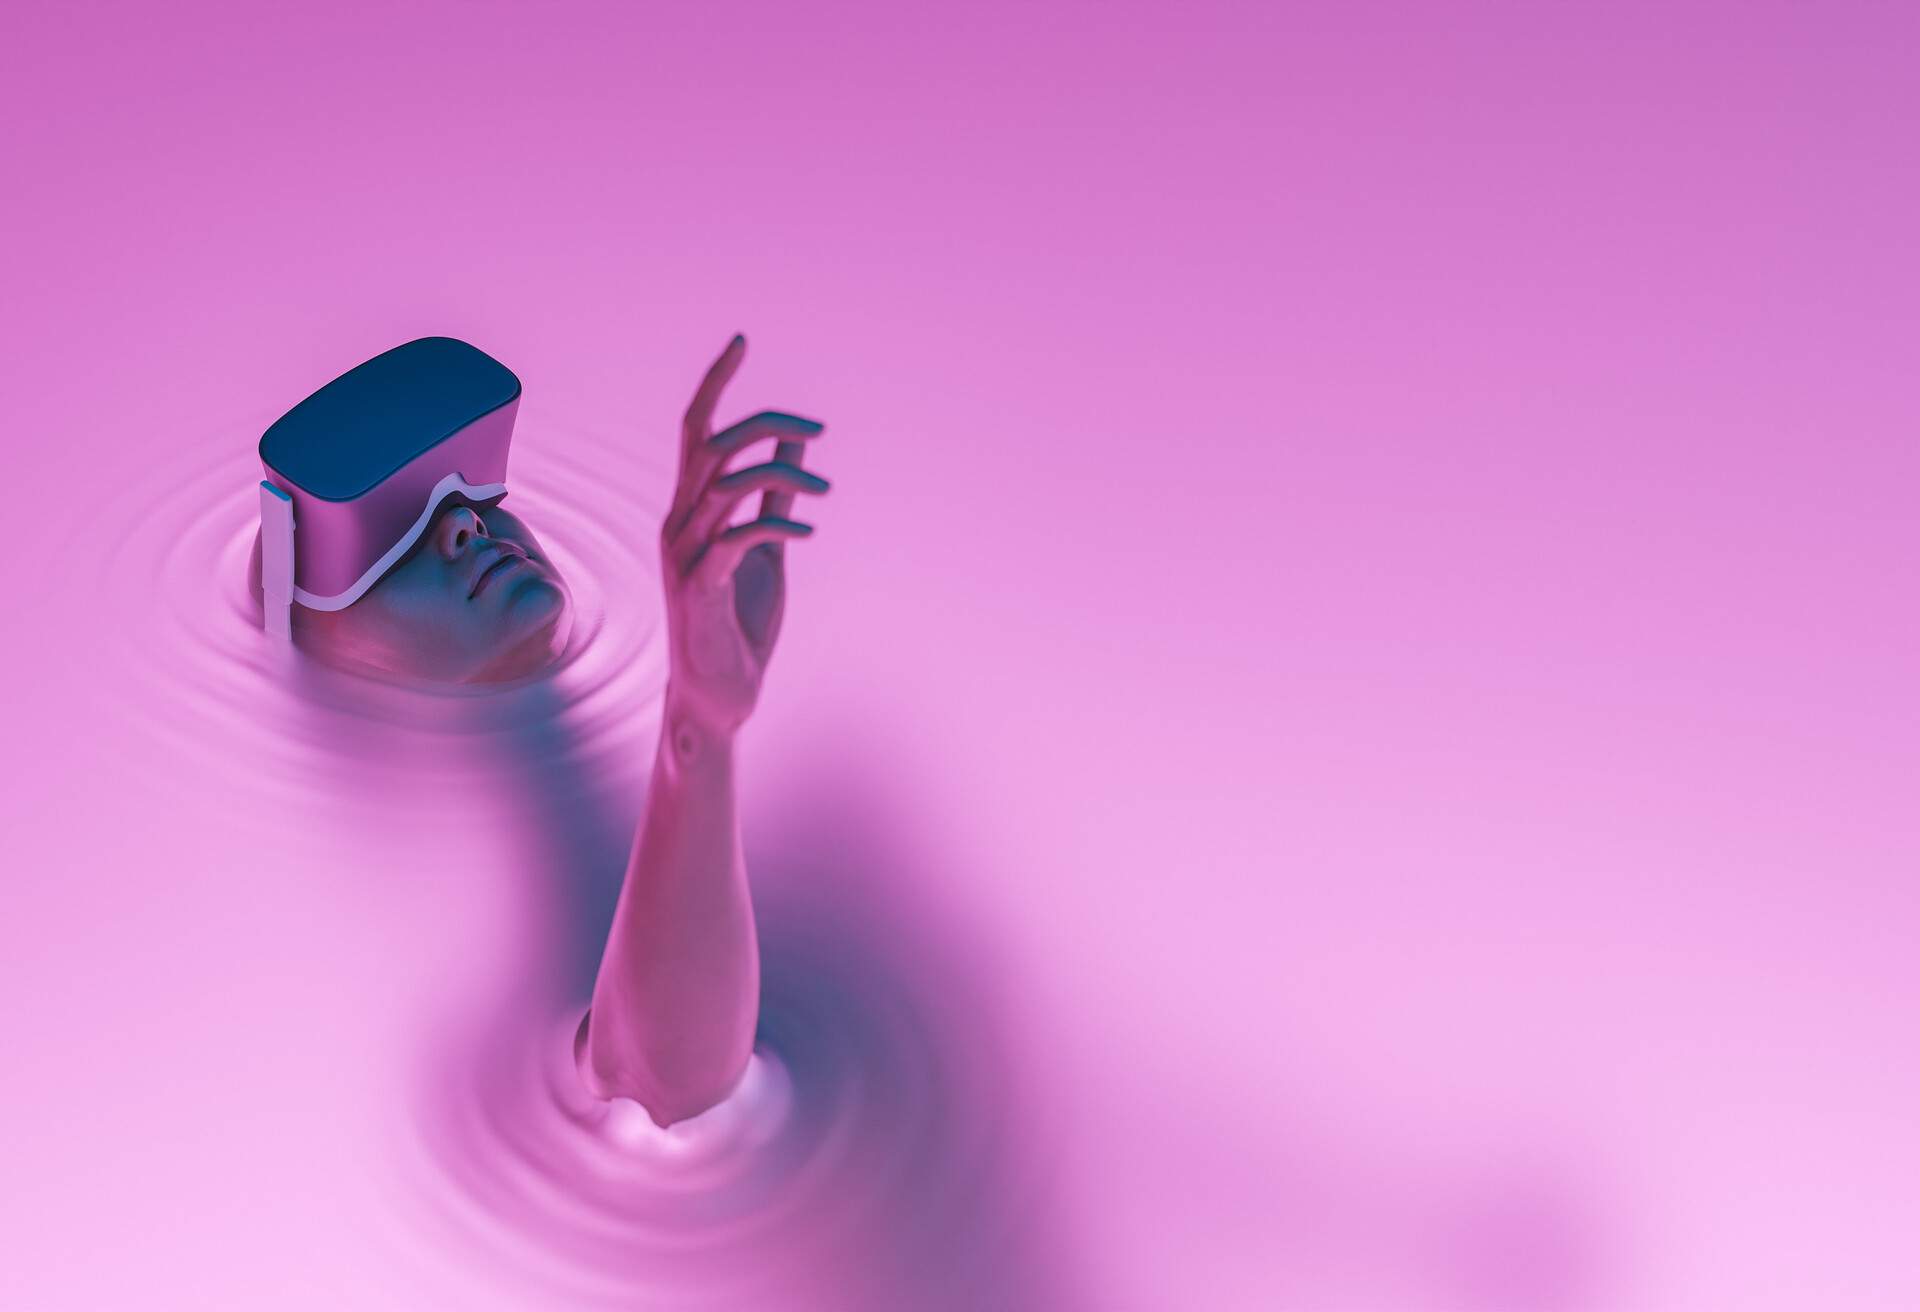 Human figure with its right hand and face wearing a VR headset emerge from a magenta-coloured liquid.